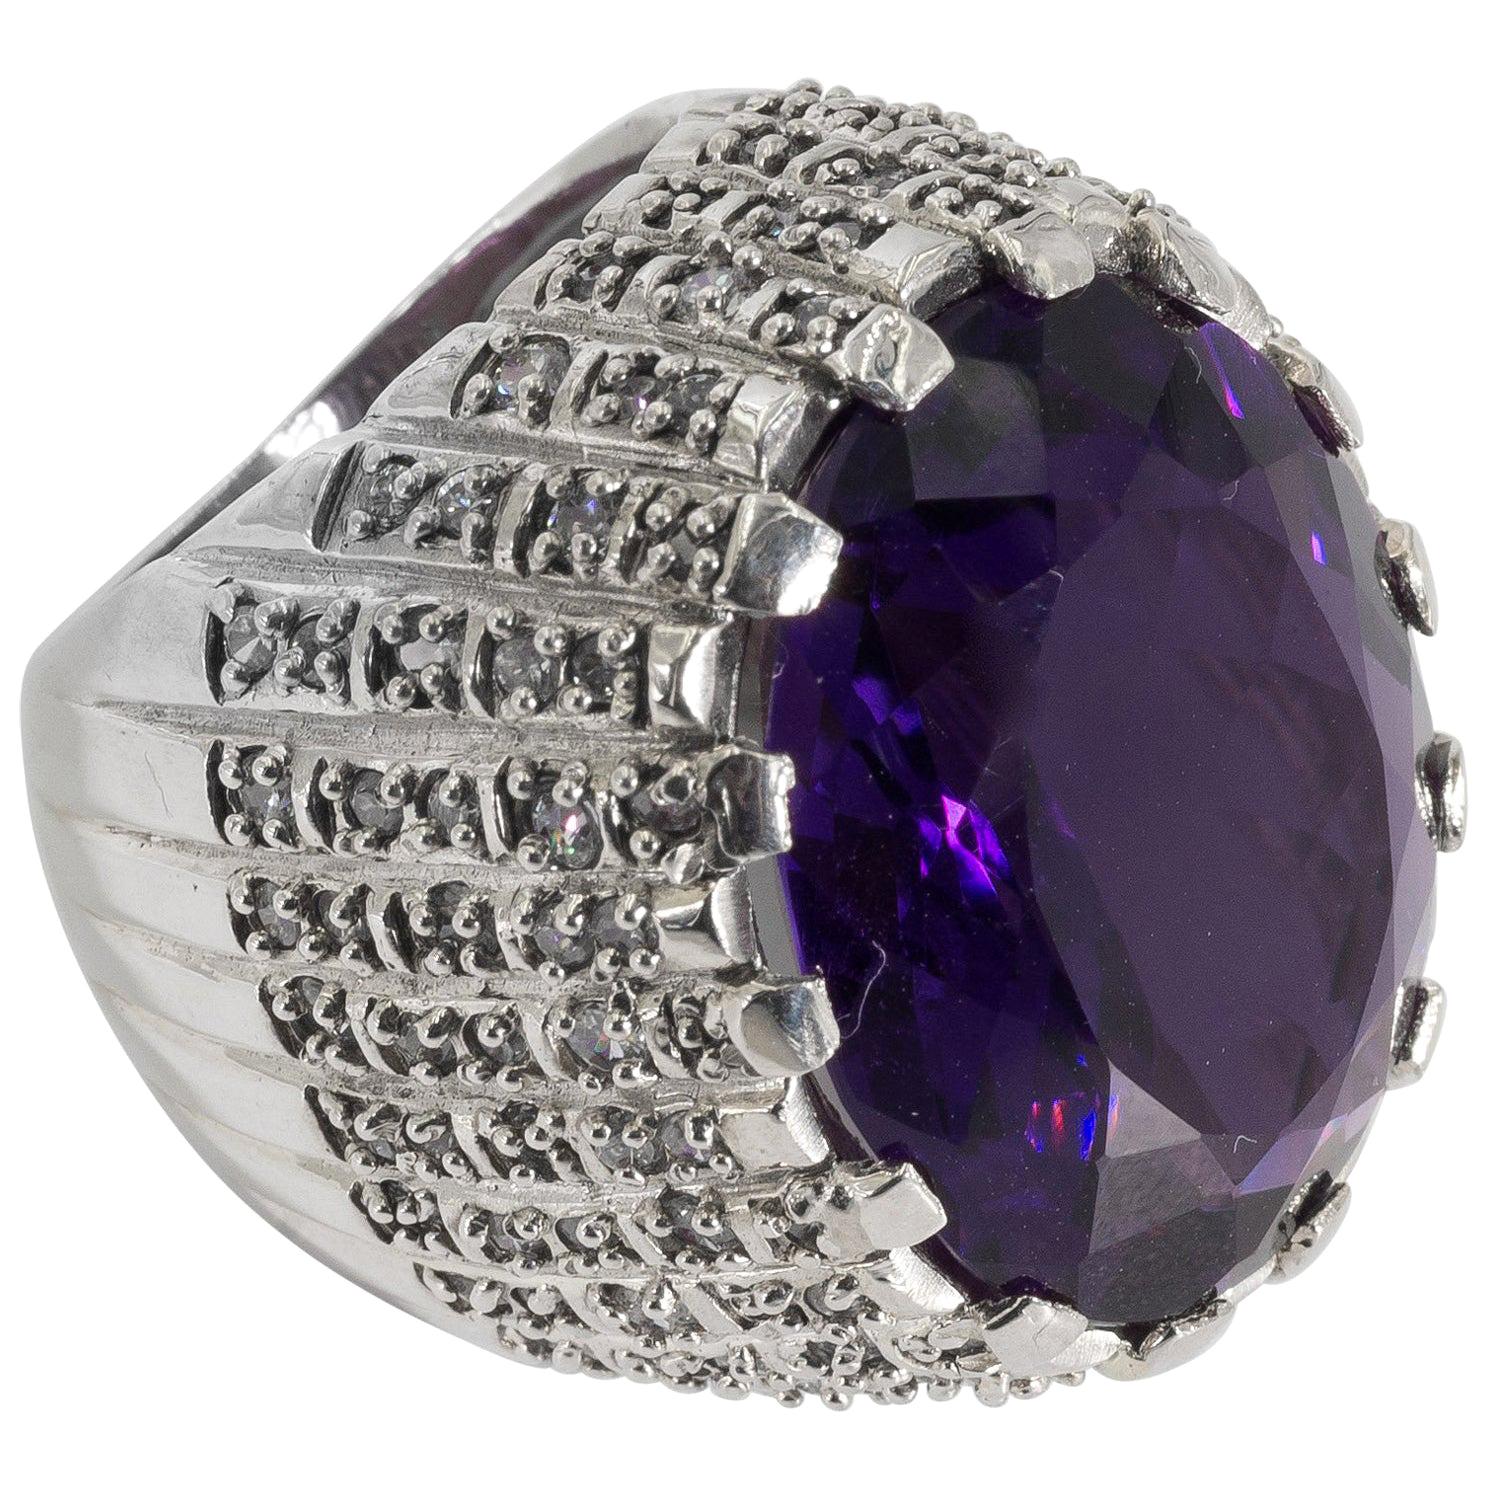 On Sale!! Large Faux Amethyst Set In A CZ Pave Sterling Chunky Ring